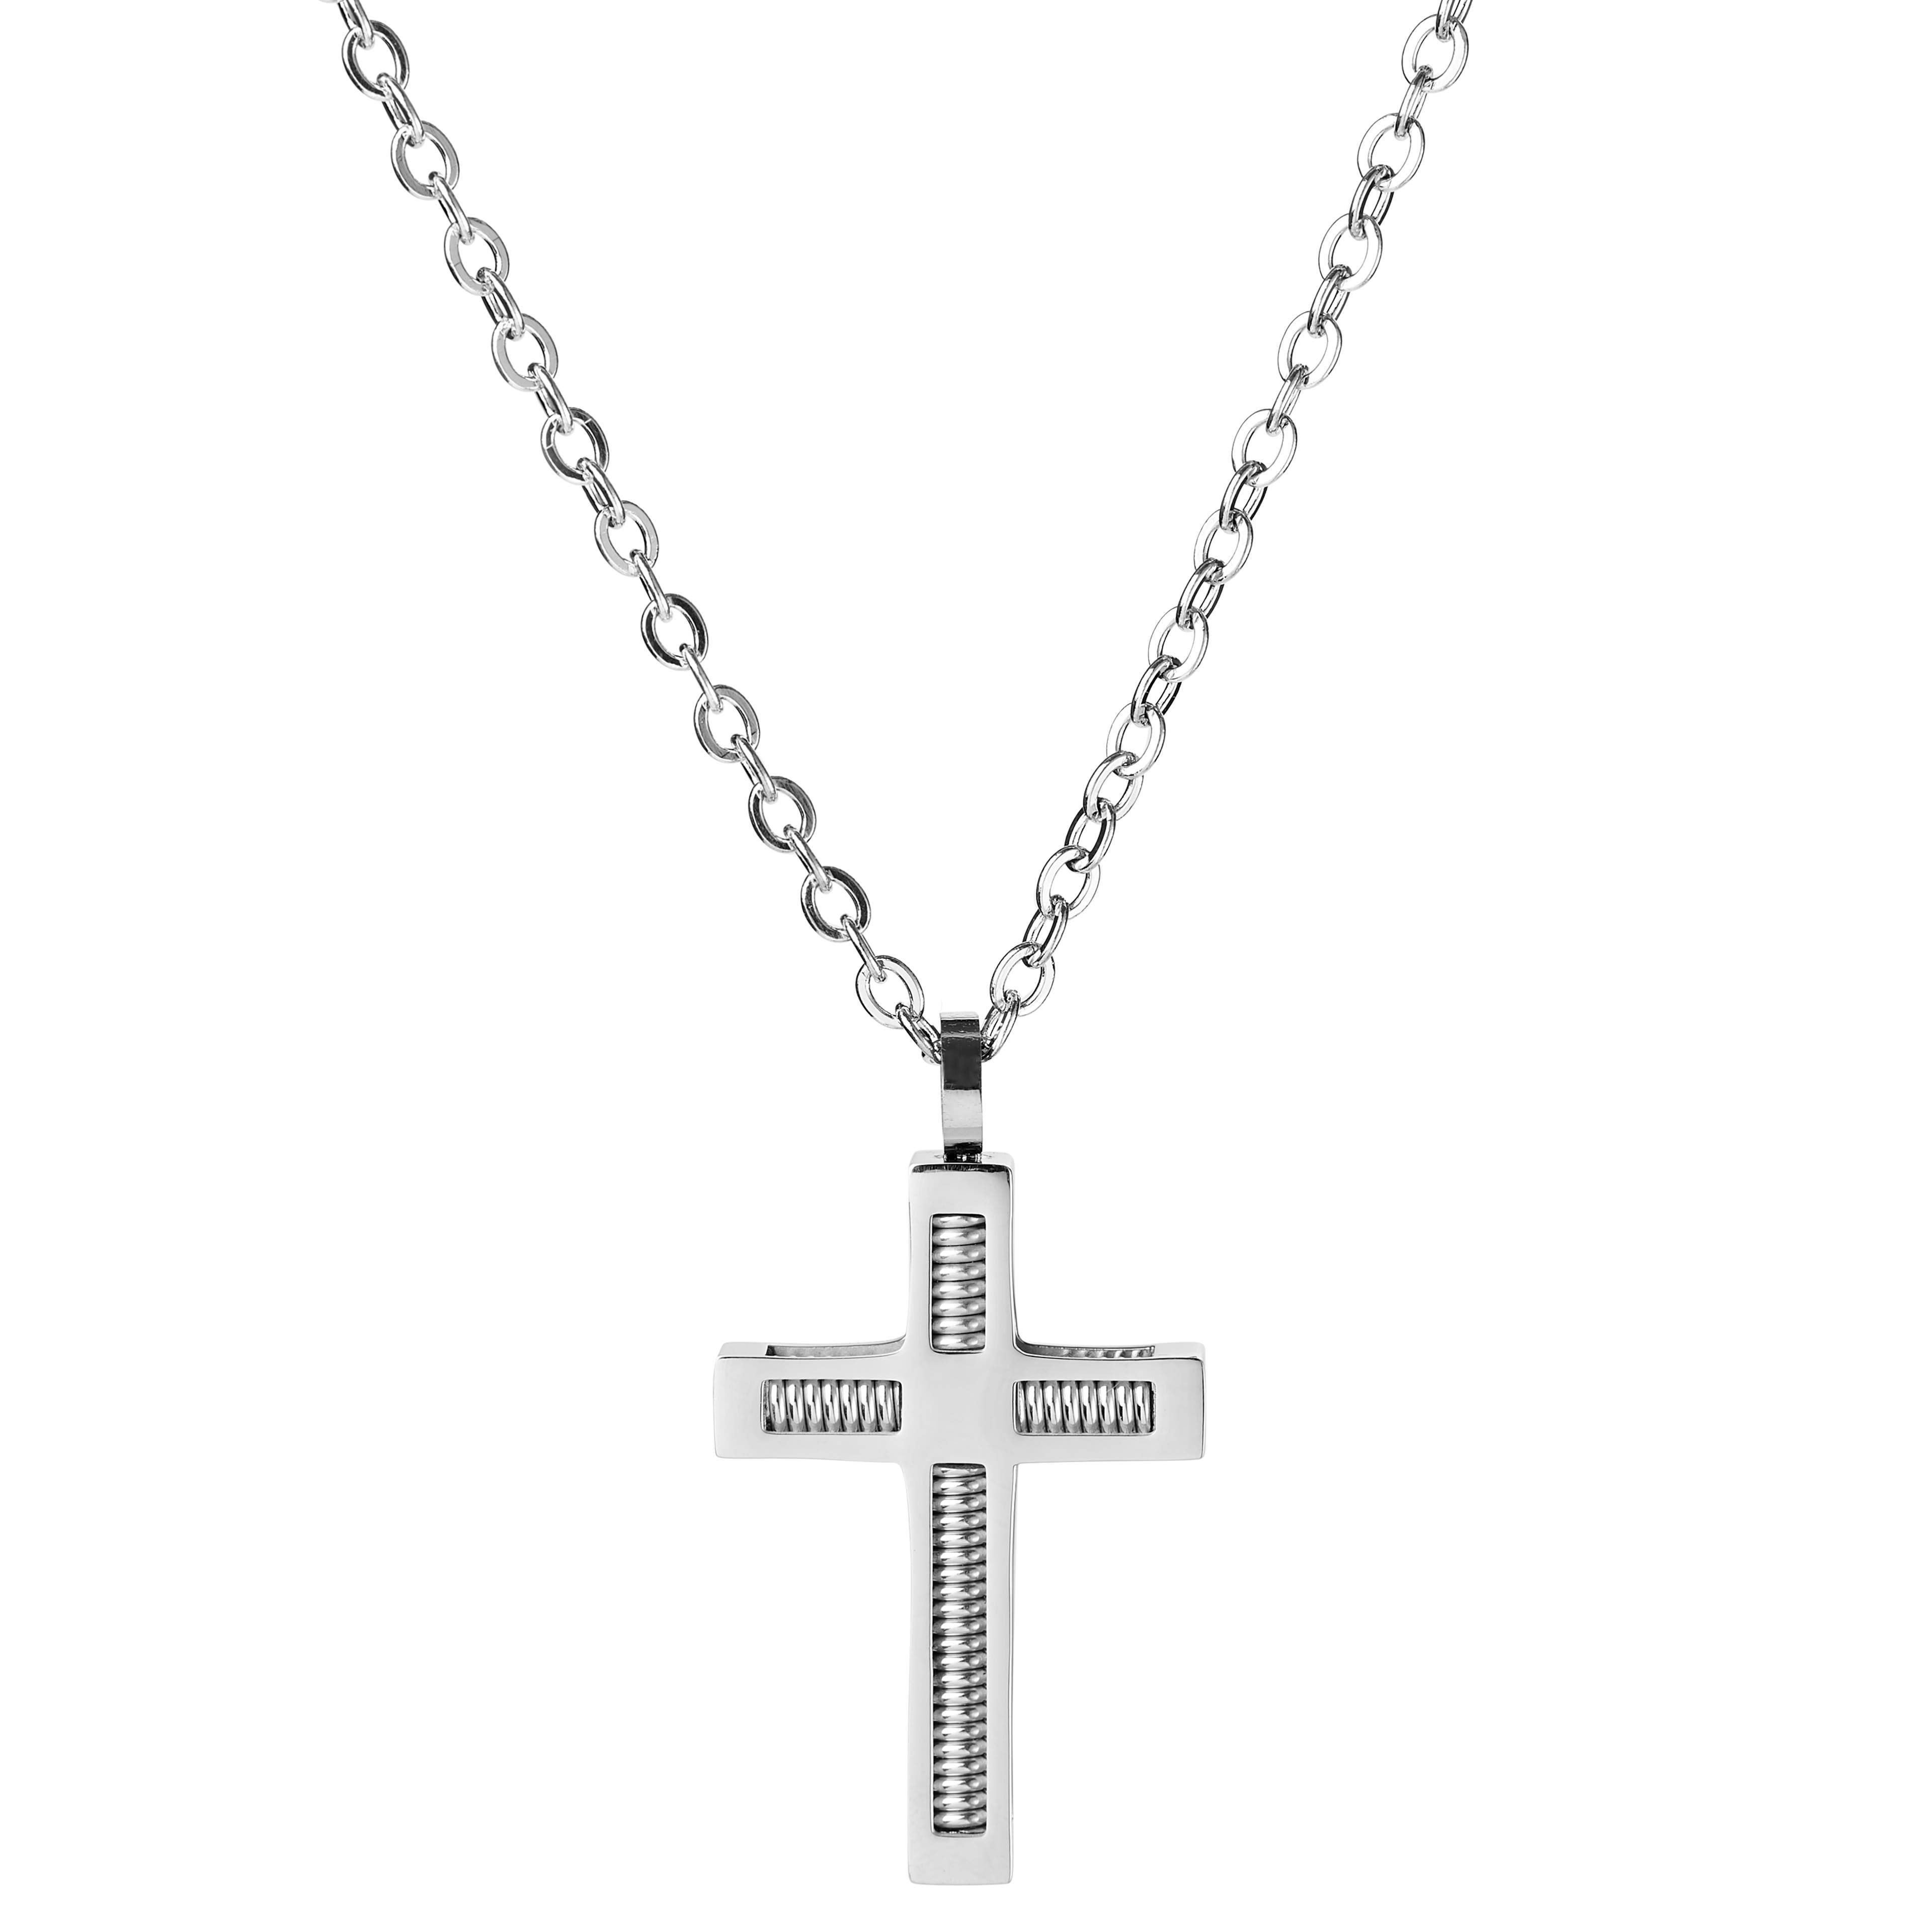 Silver-Tone Stainless Steel With Coiled Cross Box Chain Necklace